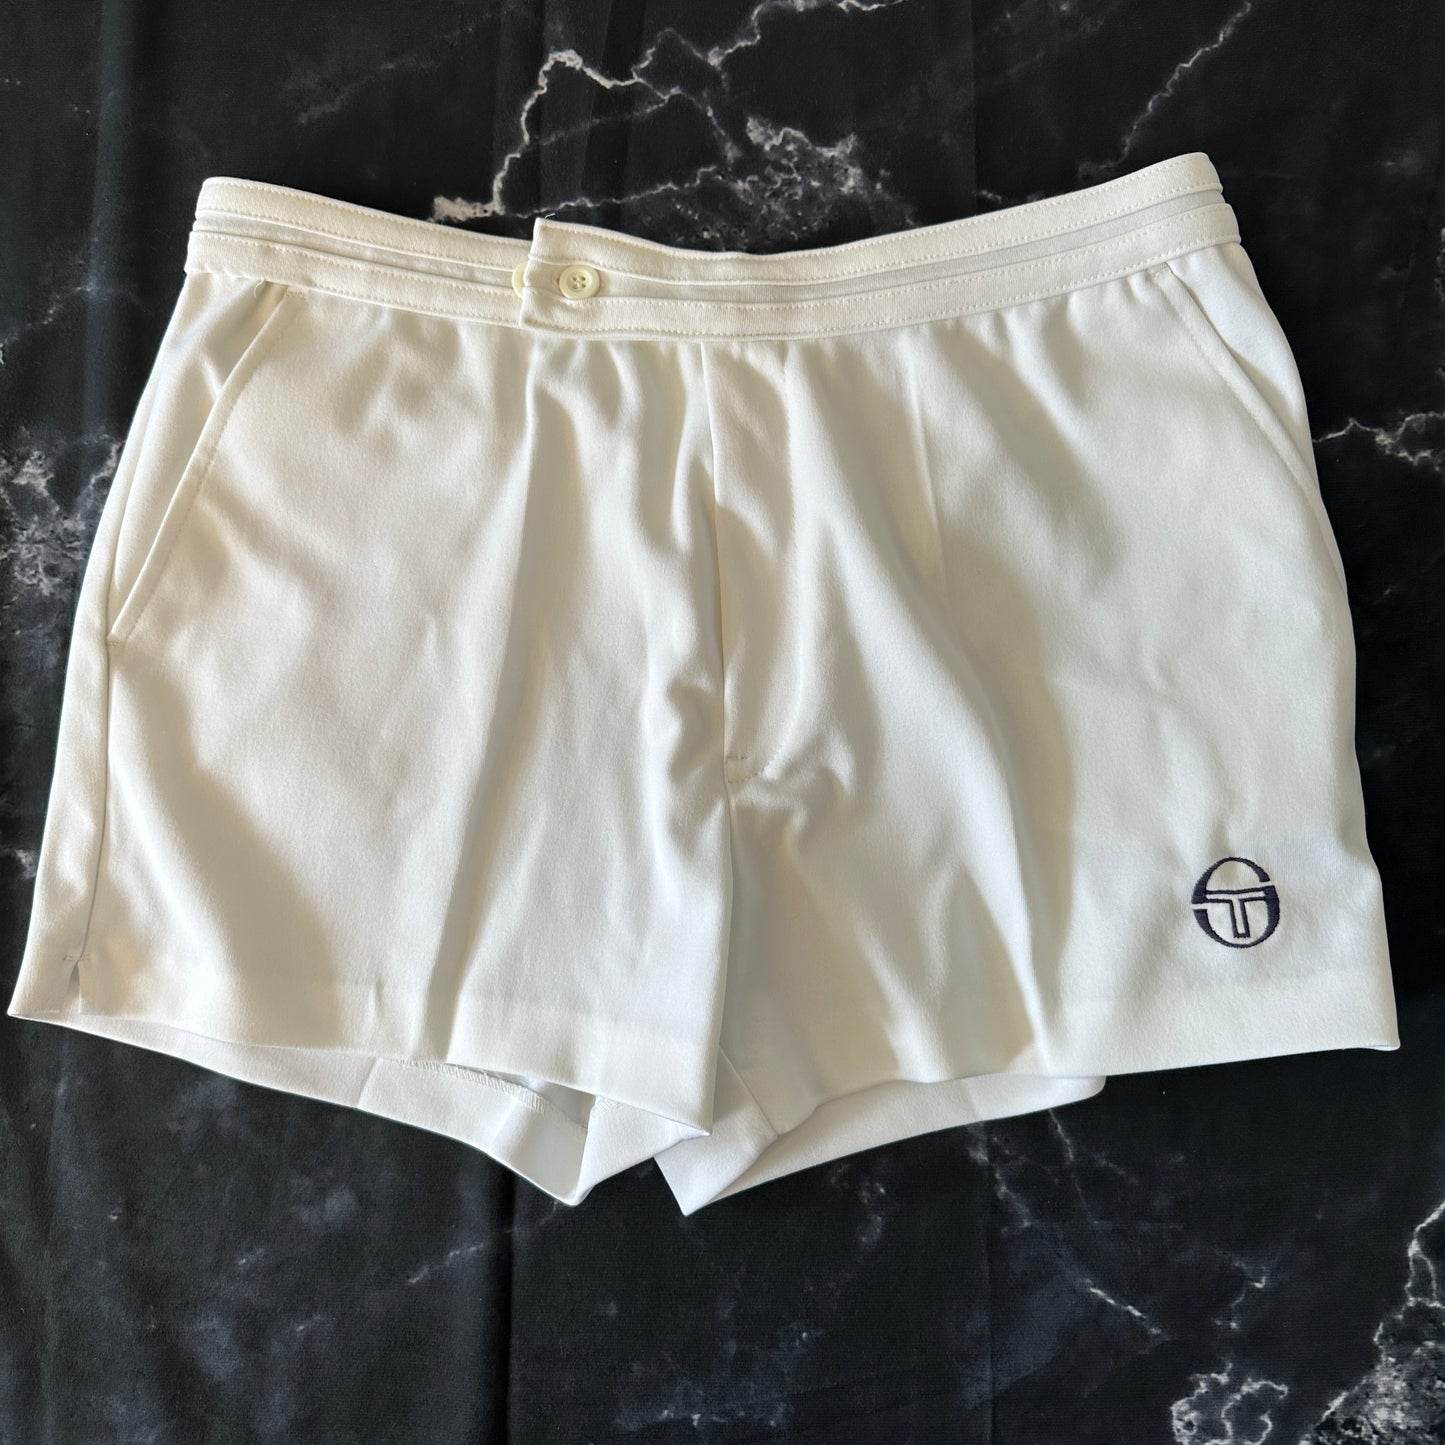 Sergio Tacchini 80s Tennis Shorts - M - Made in Italy